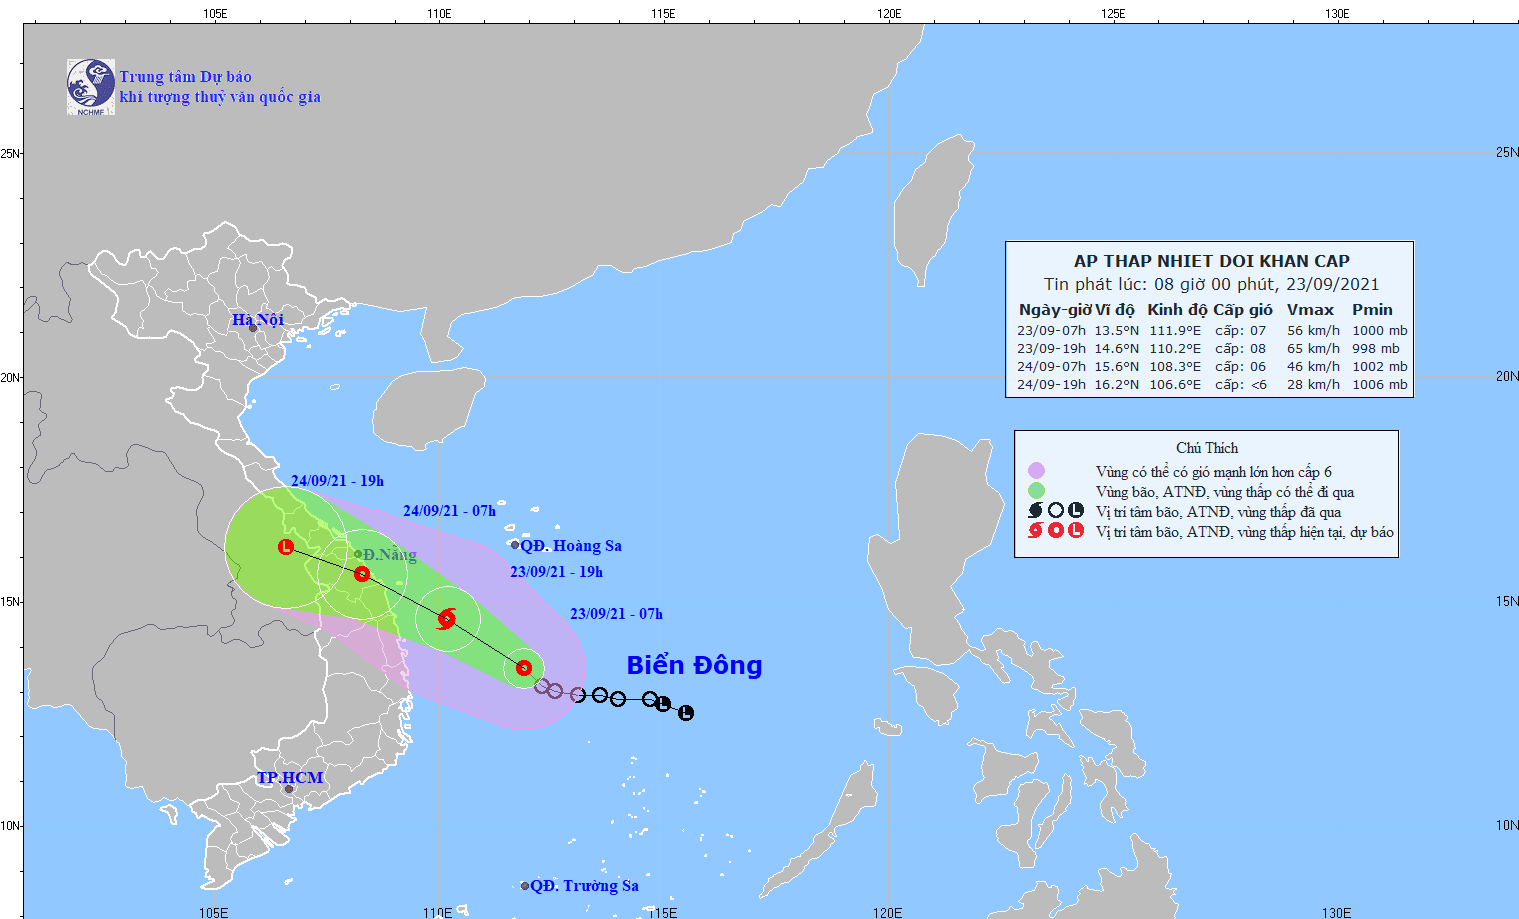 Tropical depression could become storm en route to central Vietnam